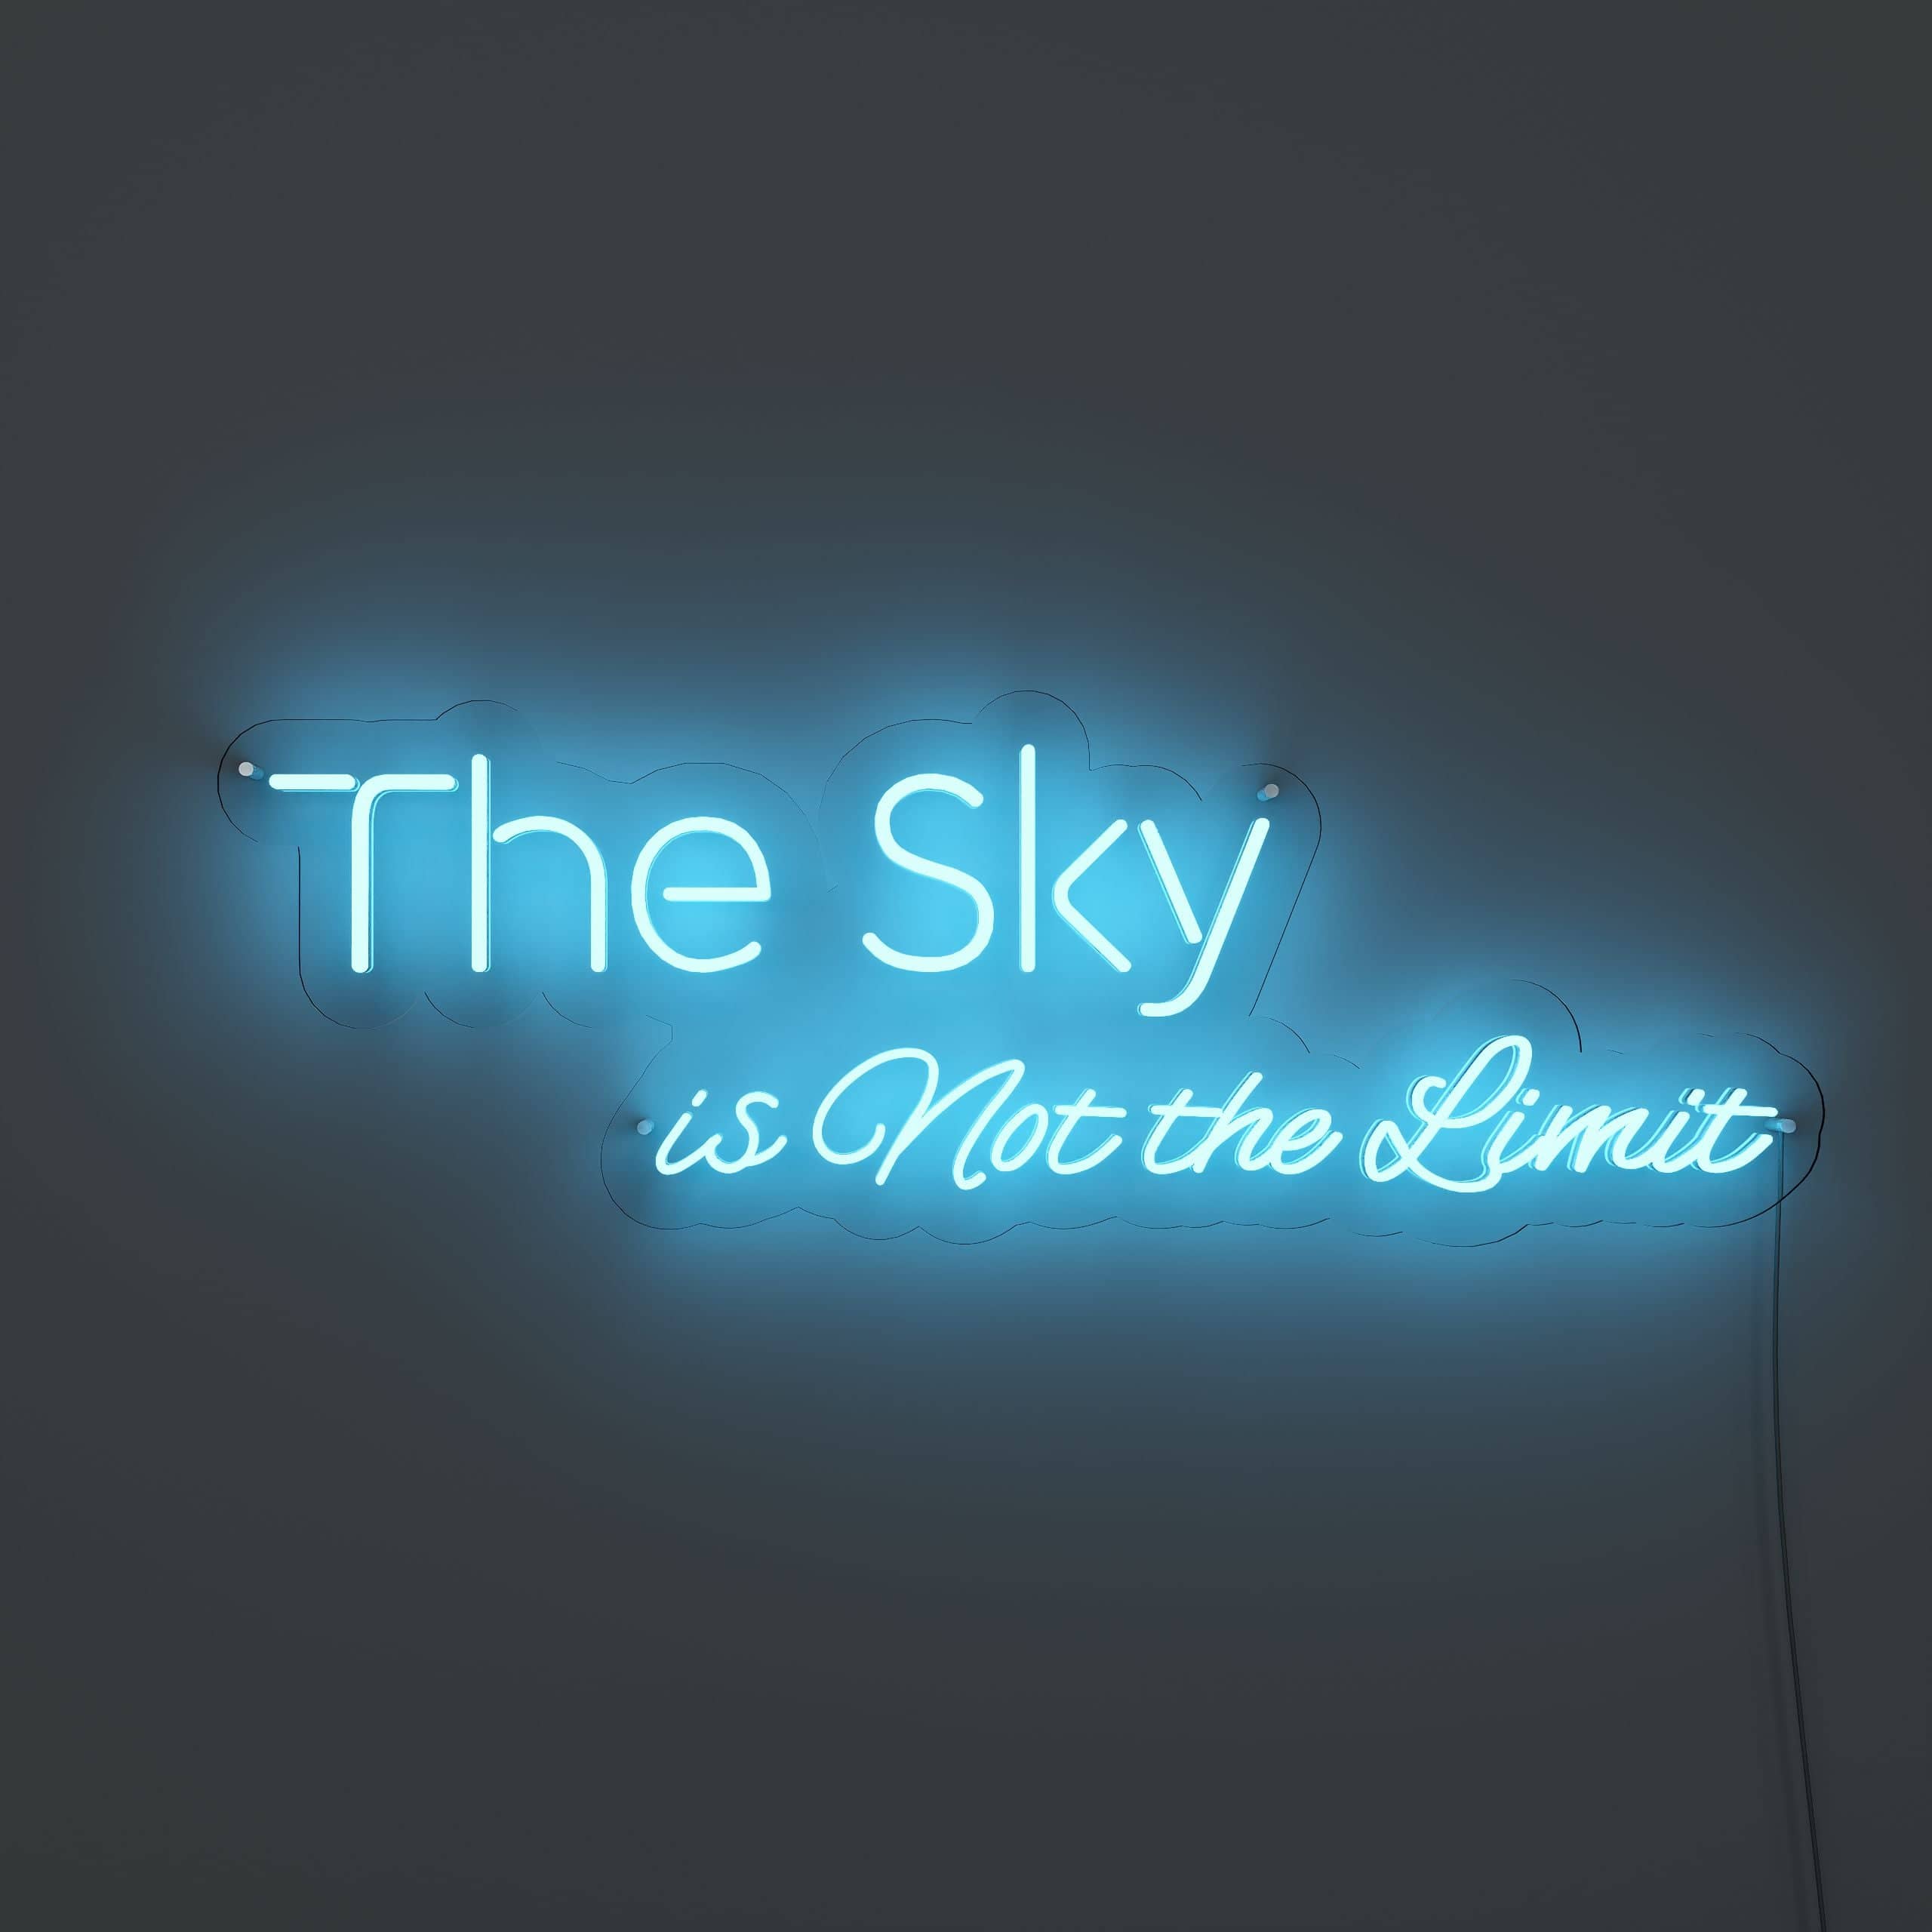 embrace-limitless-possibilities-beyond-the-sky-neon-sign-lite